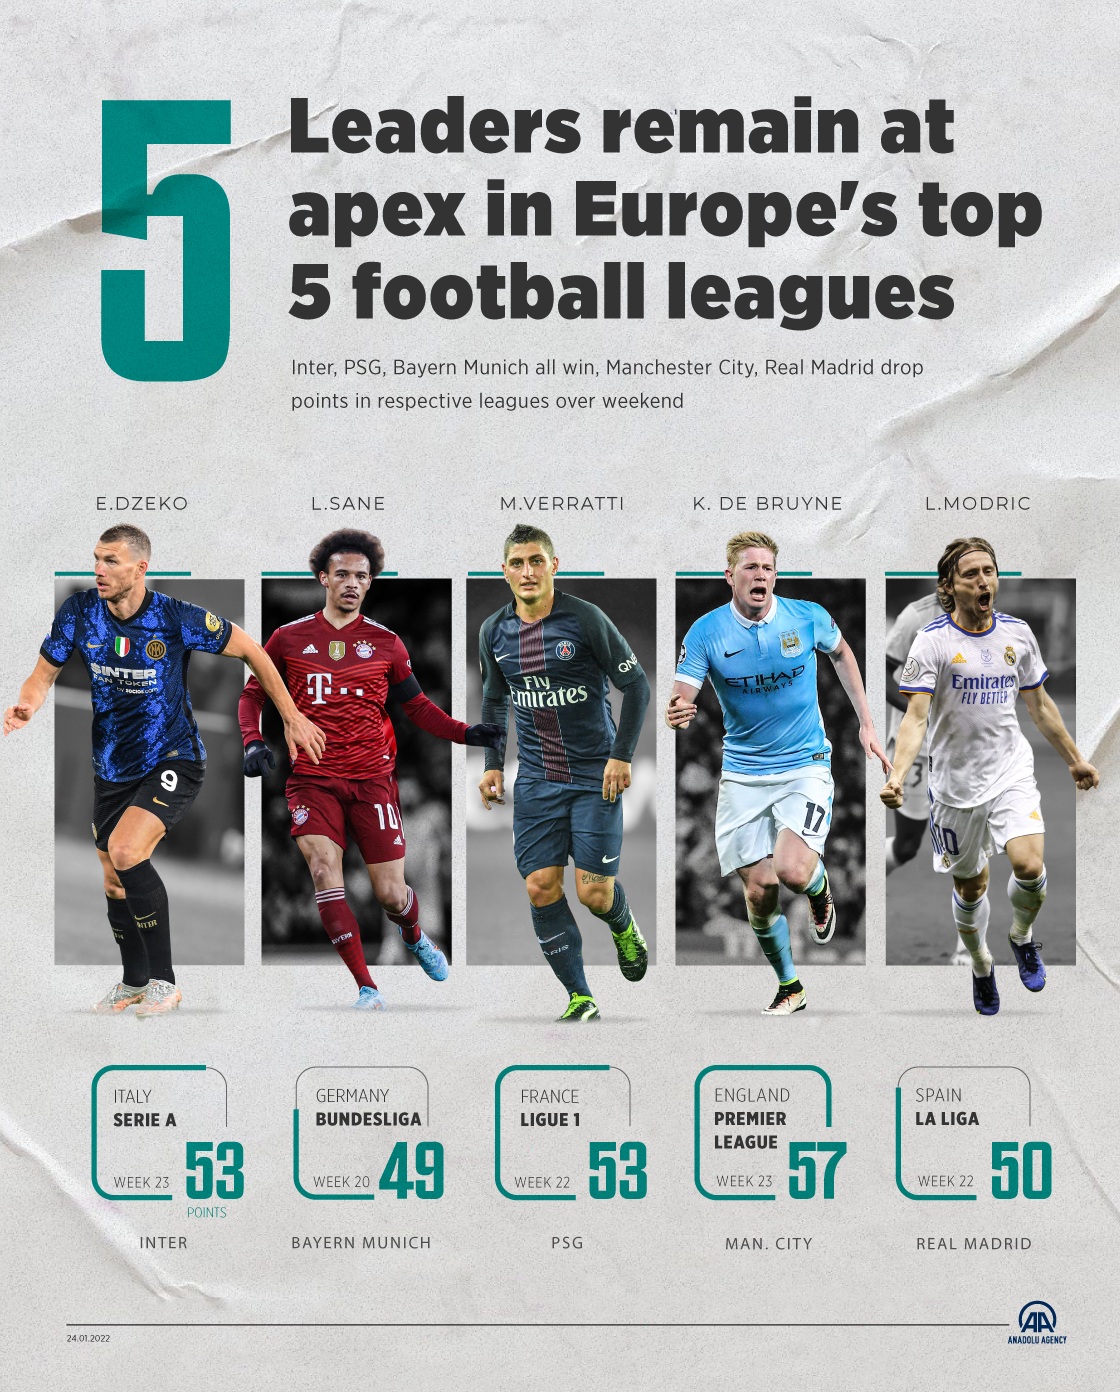 Leaders remain at apex in Europe's top 5 football leagues